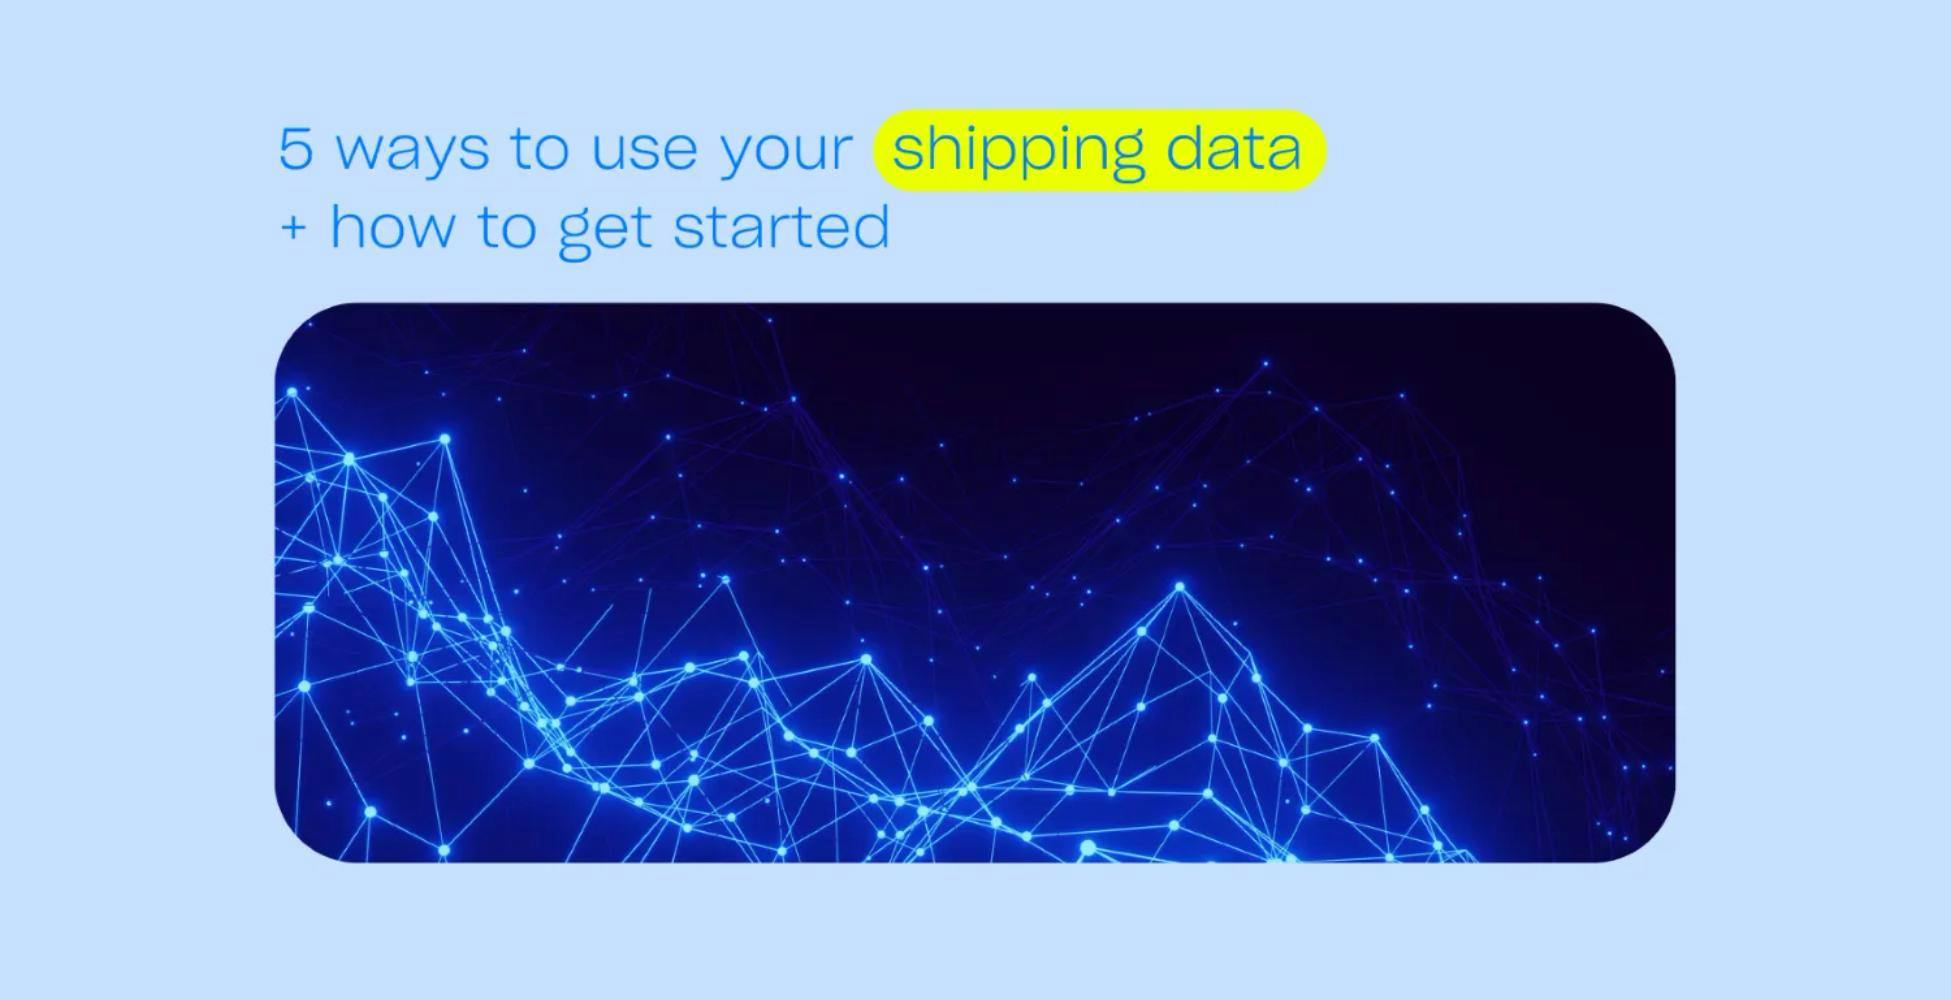 Shipping data is an important asset you should utilise to improve your operations